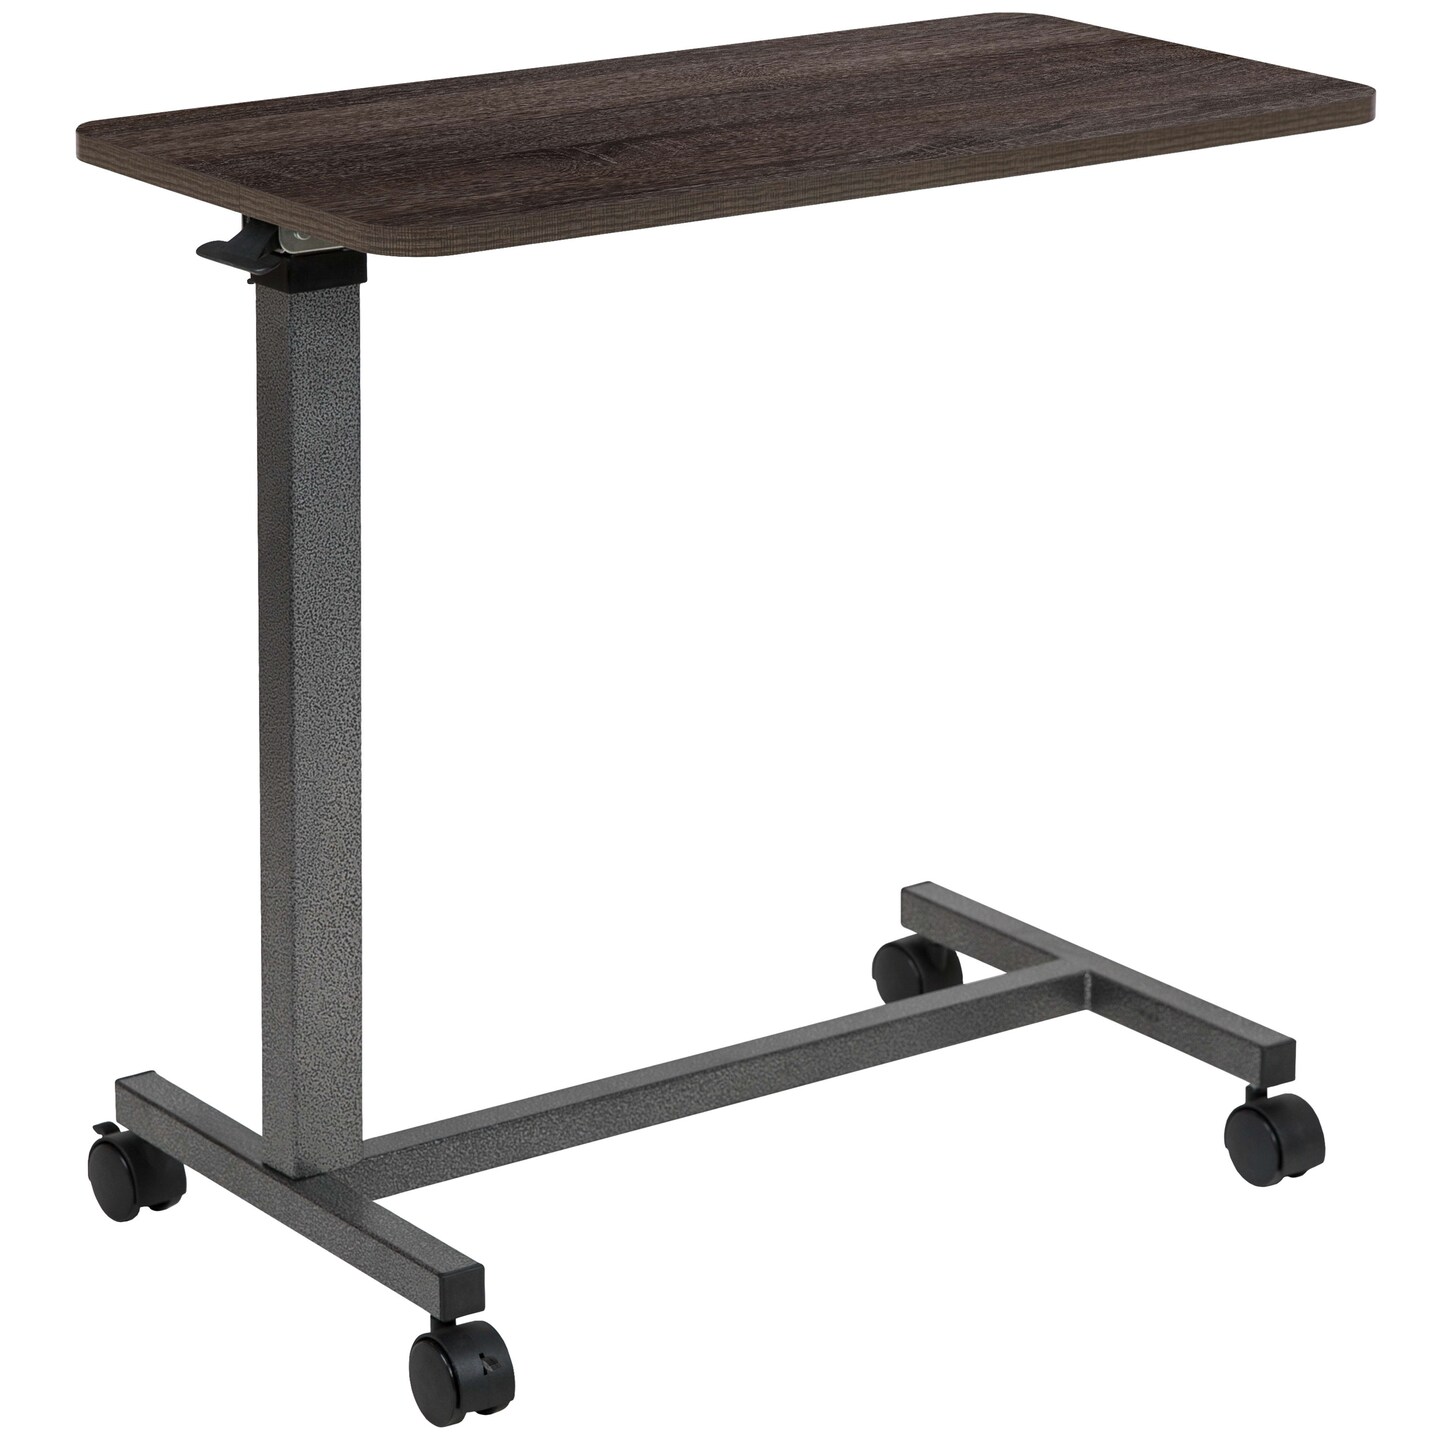 Emma and Oliver Adjustable Overbed Table with Wheels for Home and Hospital